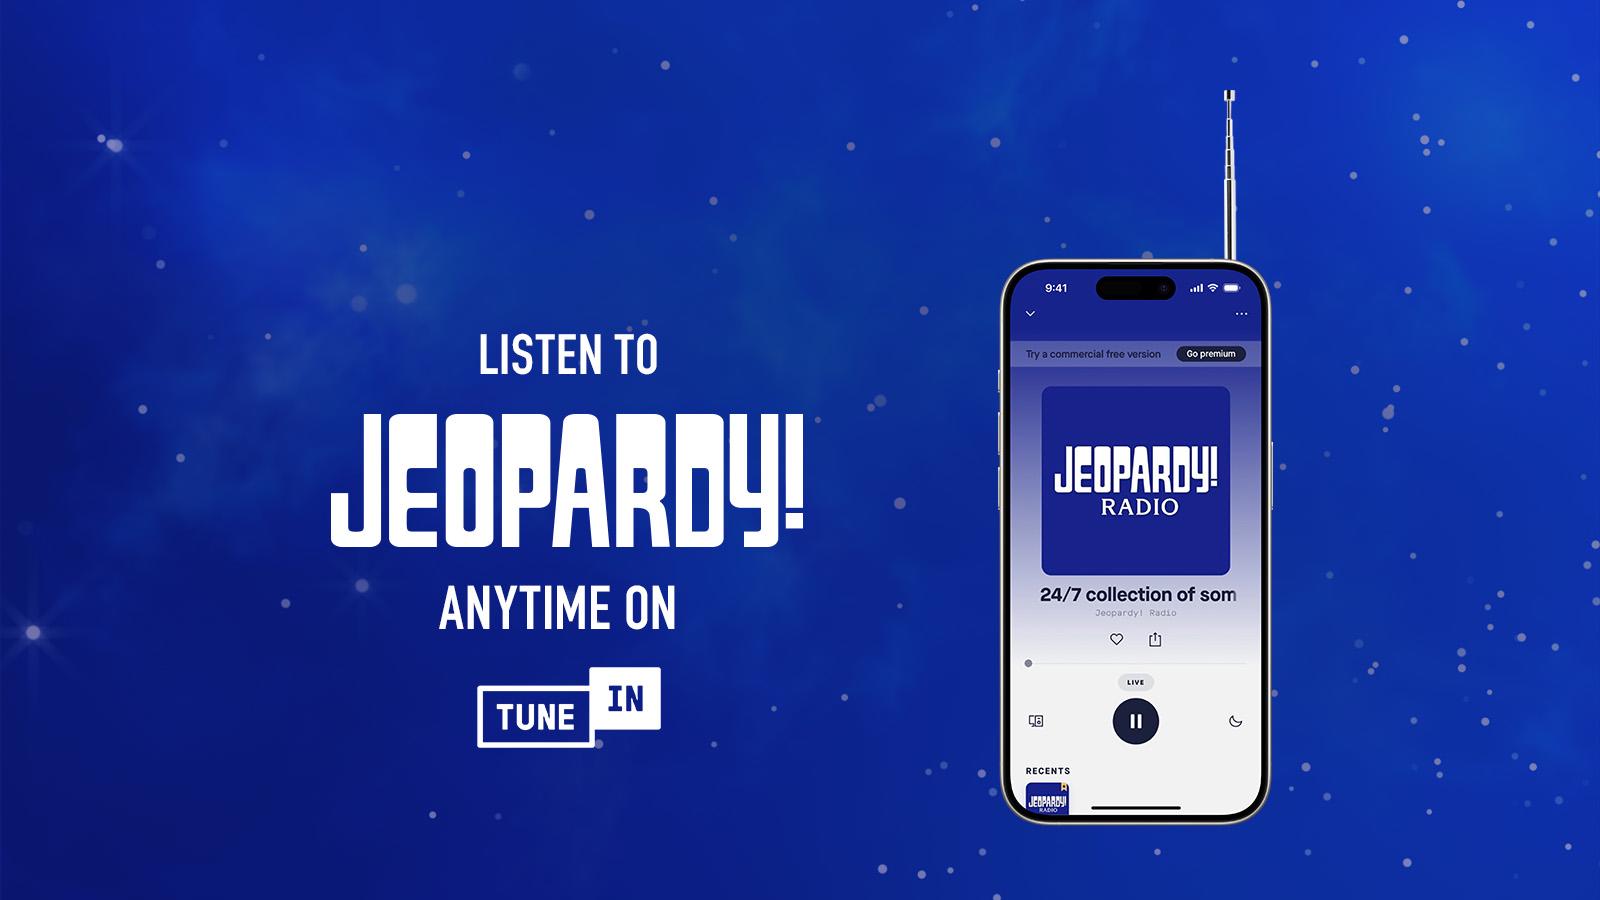 Listen to Jeopardy! Anytime on TuneIn 